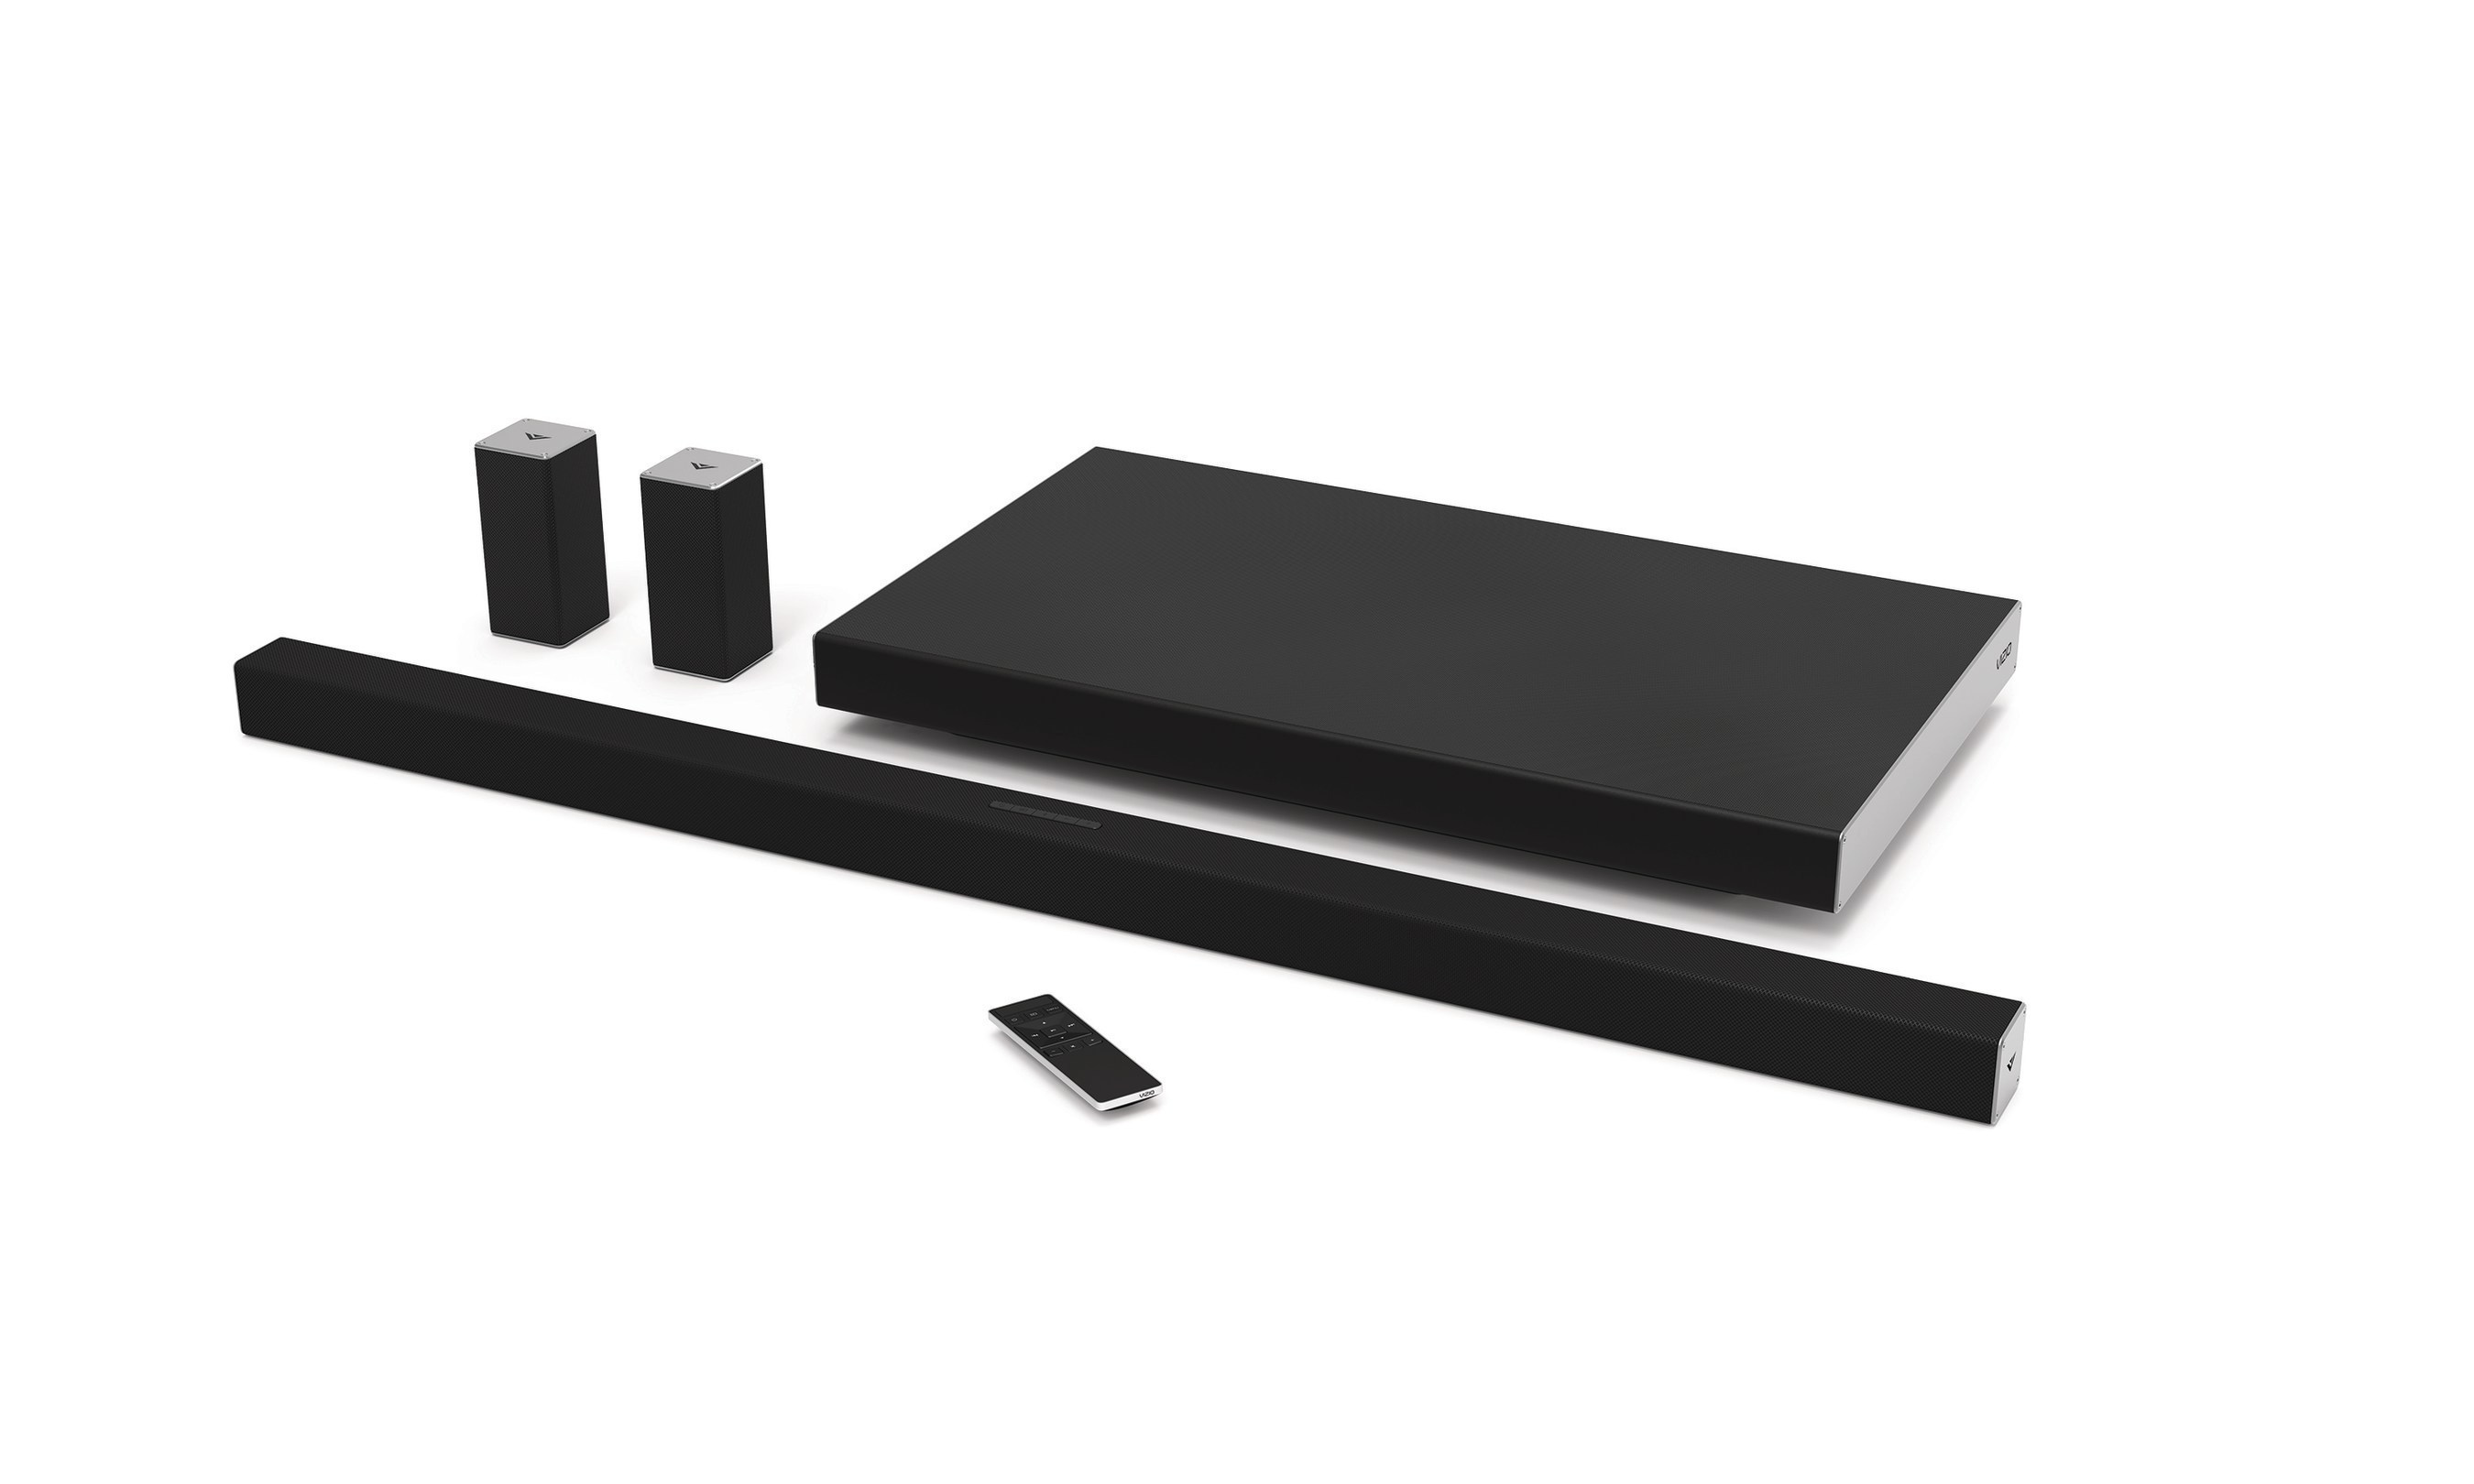 VIZIO debuts all-new home theater sound bar collection, featuring high performance 5.1 surround sound and innovative, new slim design. The line-up is part of next generation VIZIO SmartCast(TM) Ecosystem with Integrated Google Cast for Simple WiFi Casting from anywhere in the home.